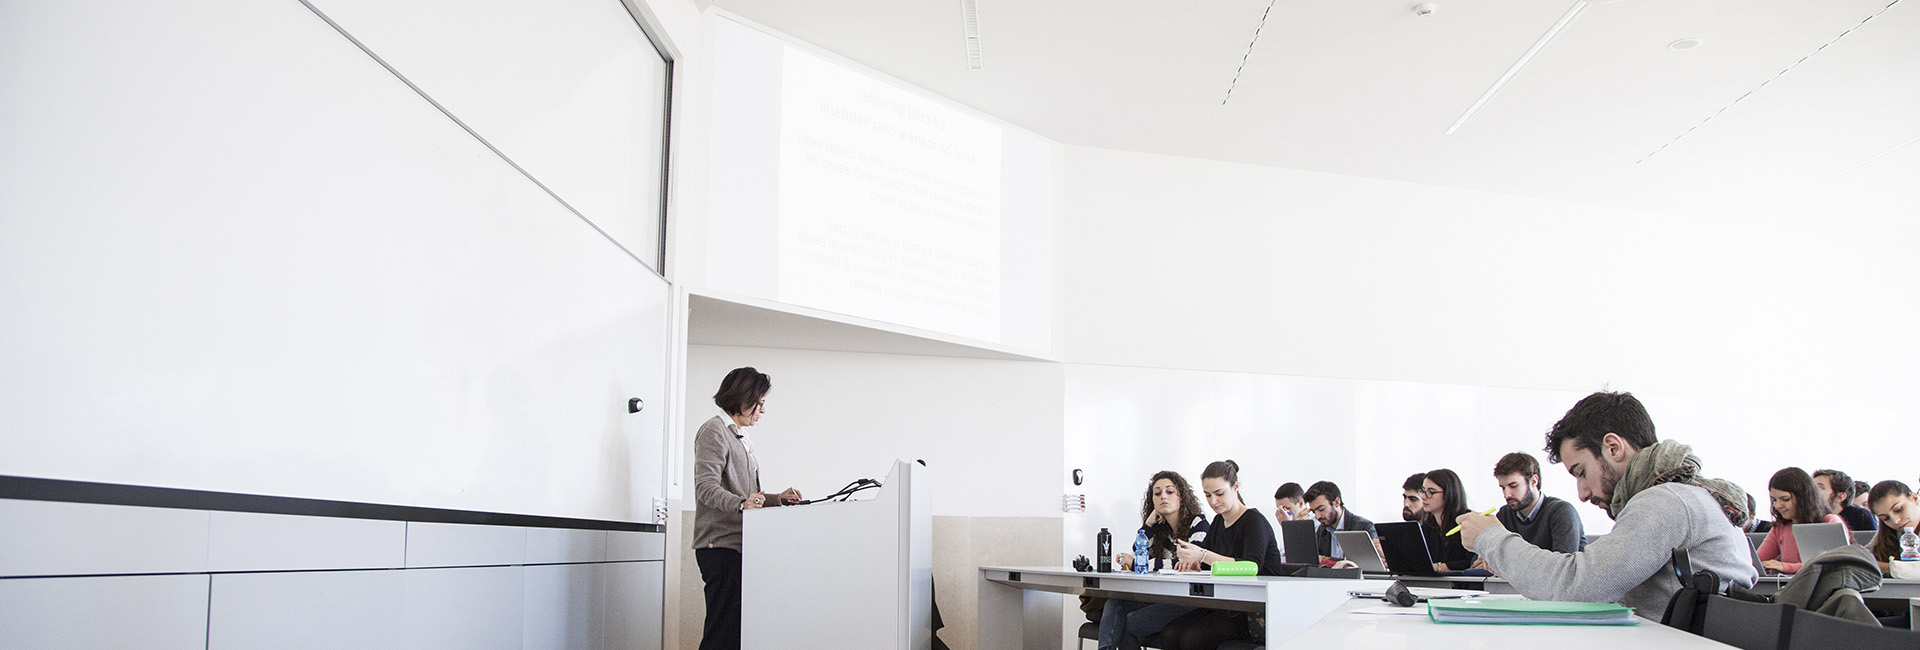 Bocconi Master of Science Admissions ranking